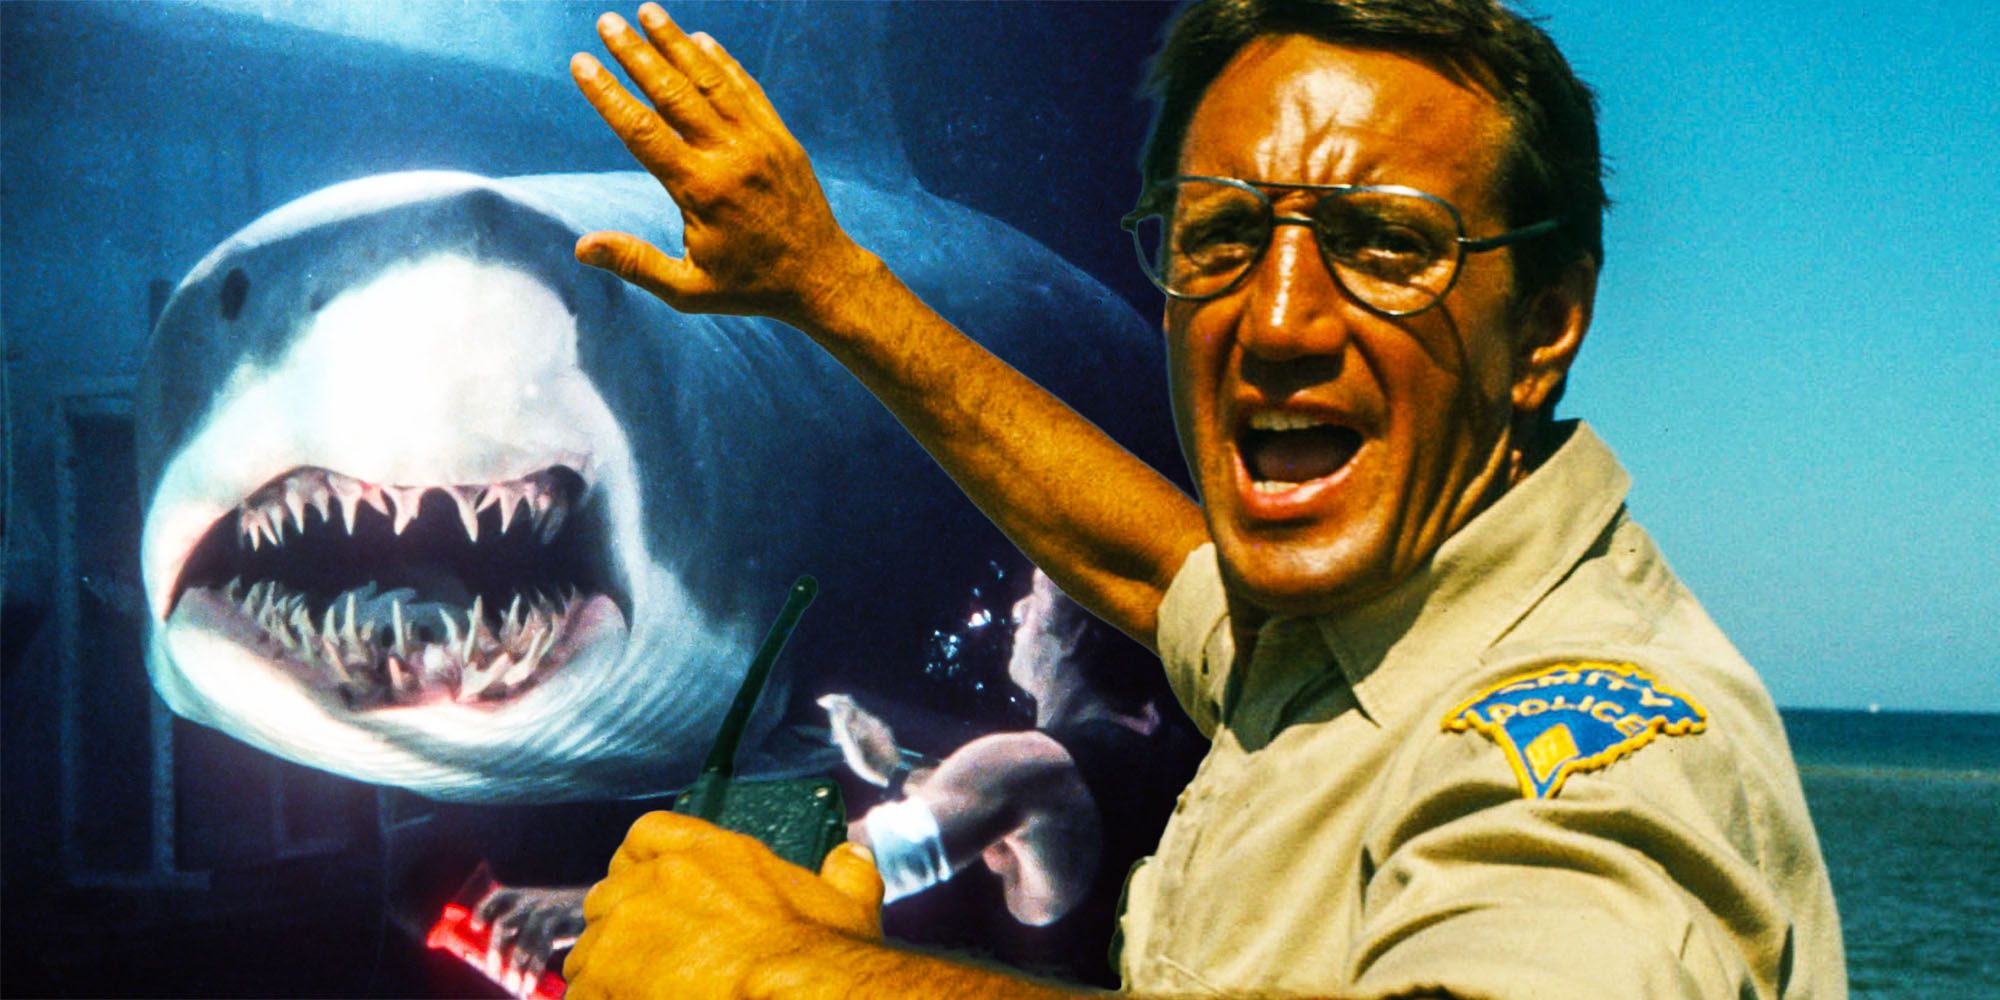 How Deep Blue Sea’s Shark Deaths Mirrored The Jaws Franchise